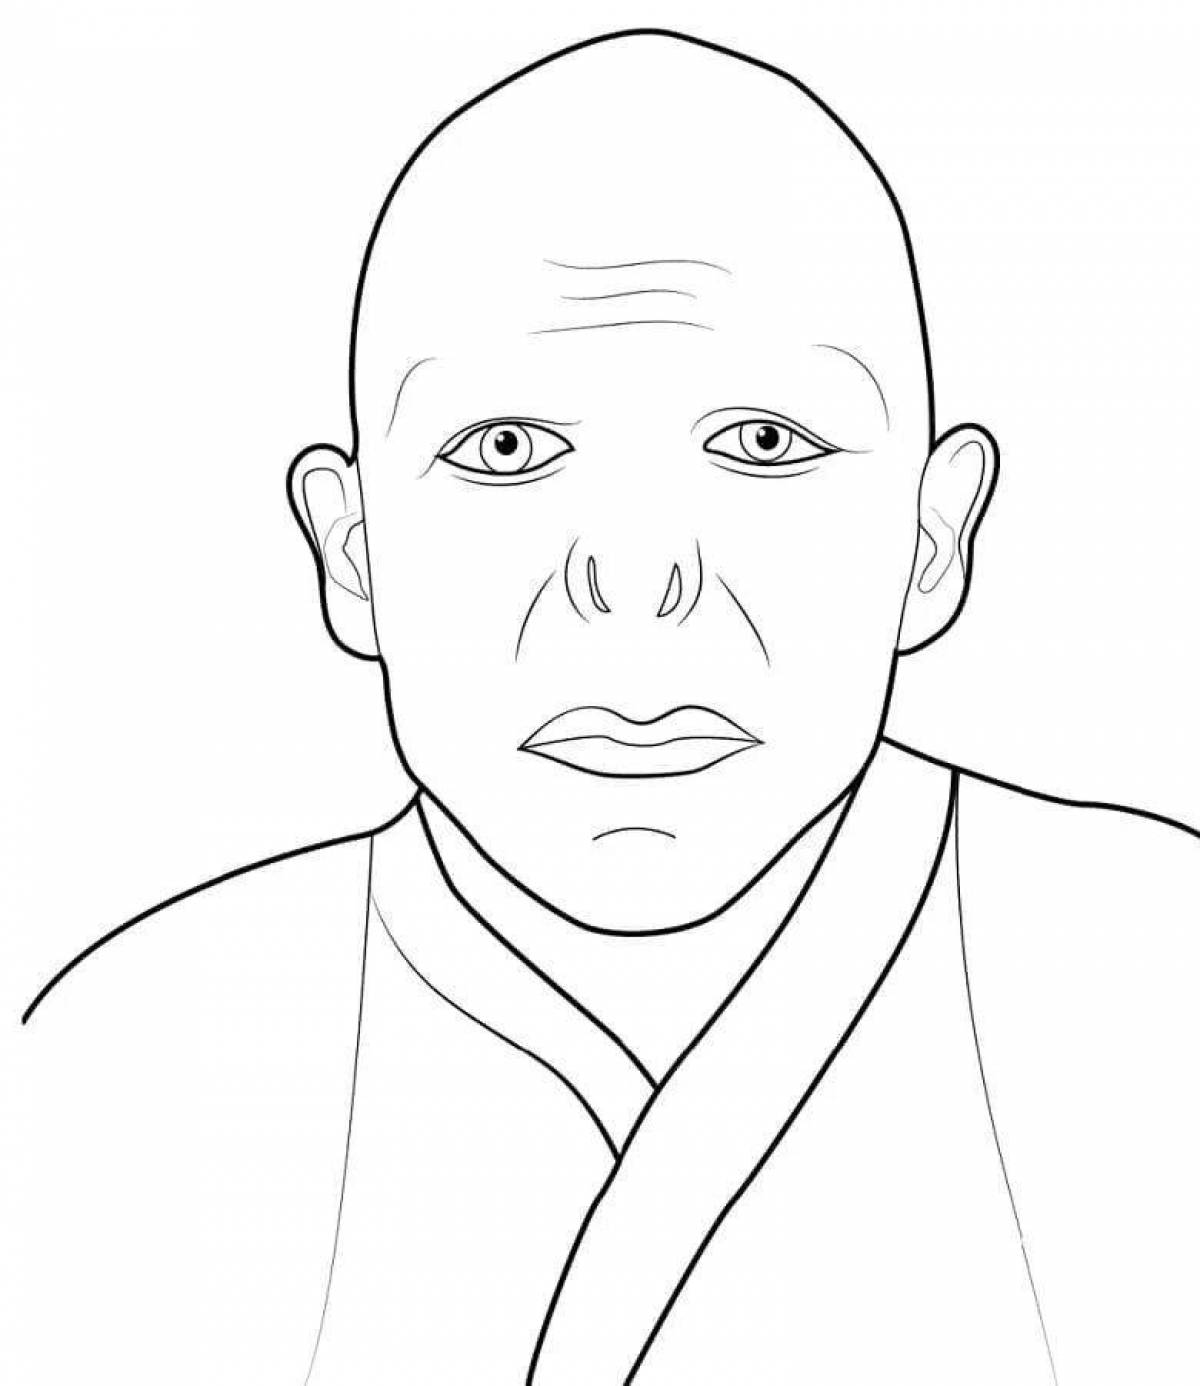 Brilliantly shaded voldemort coloring book